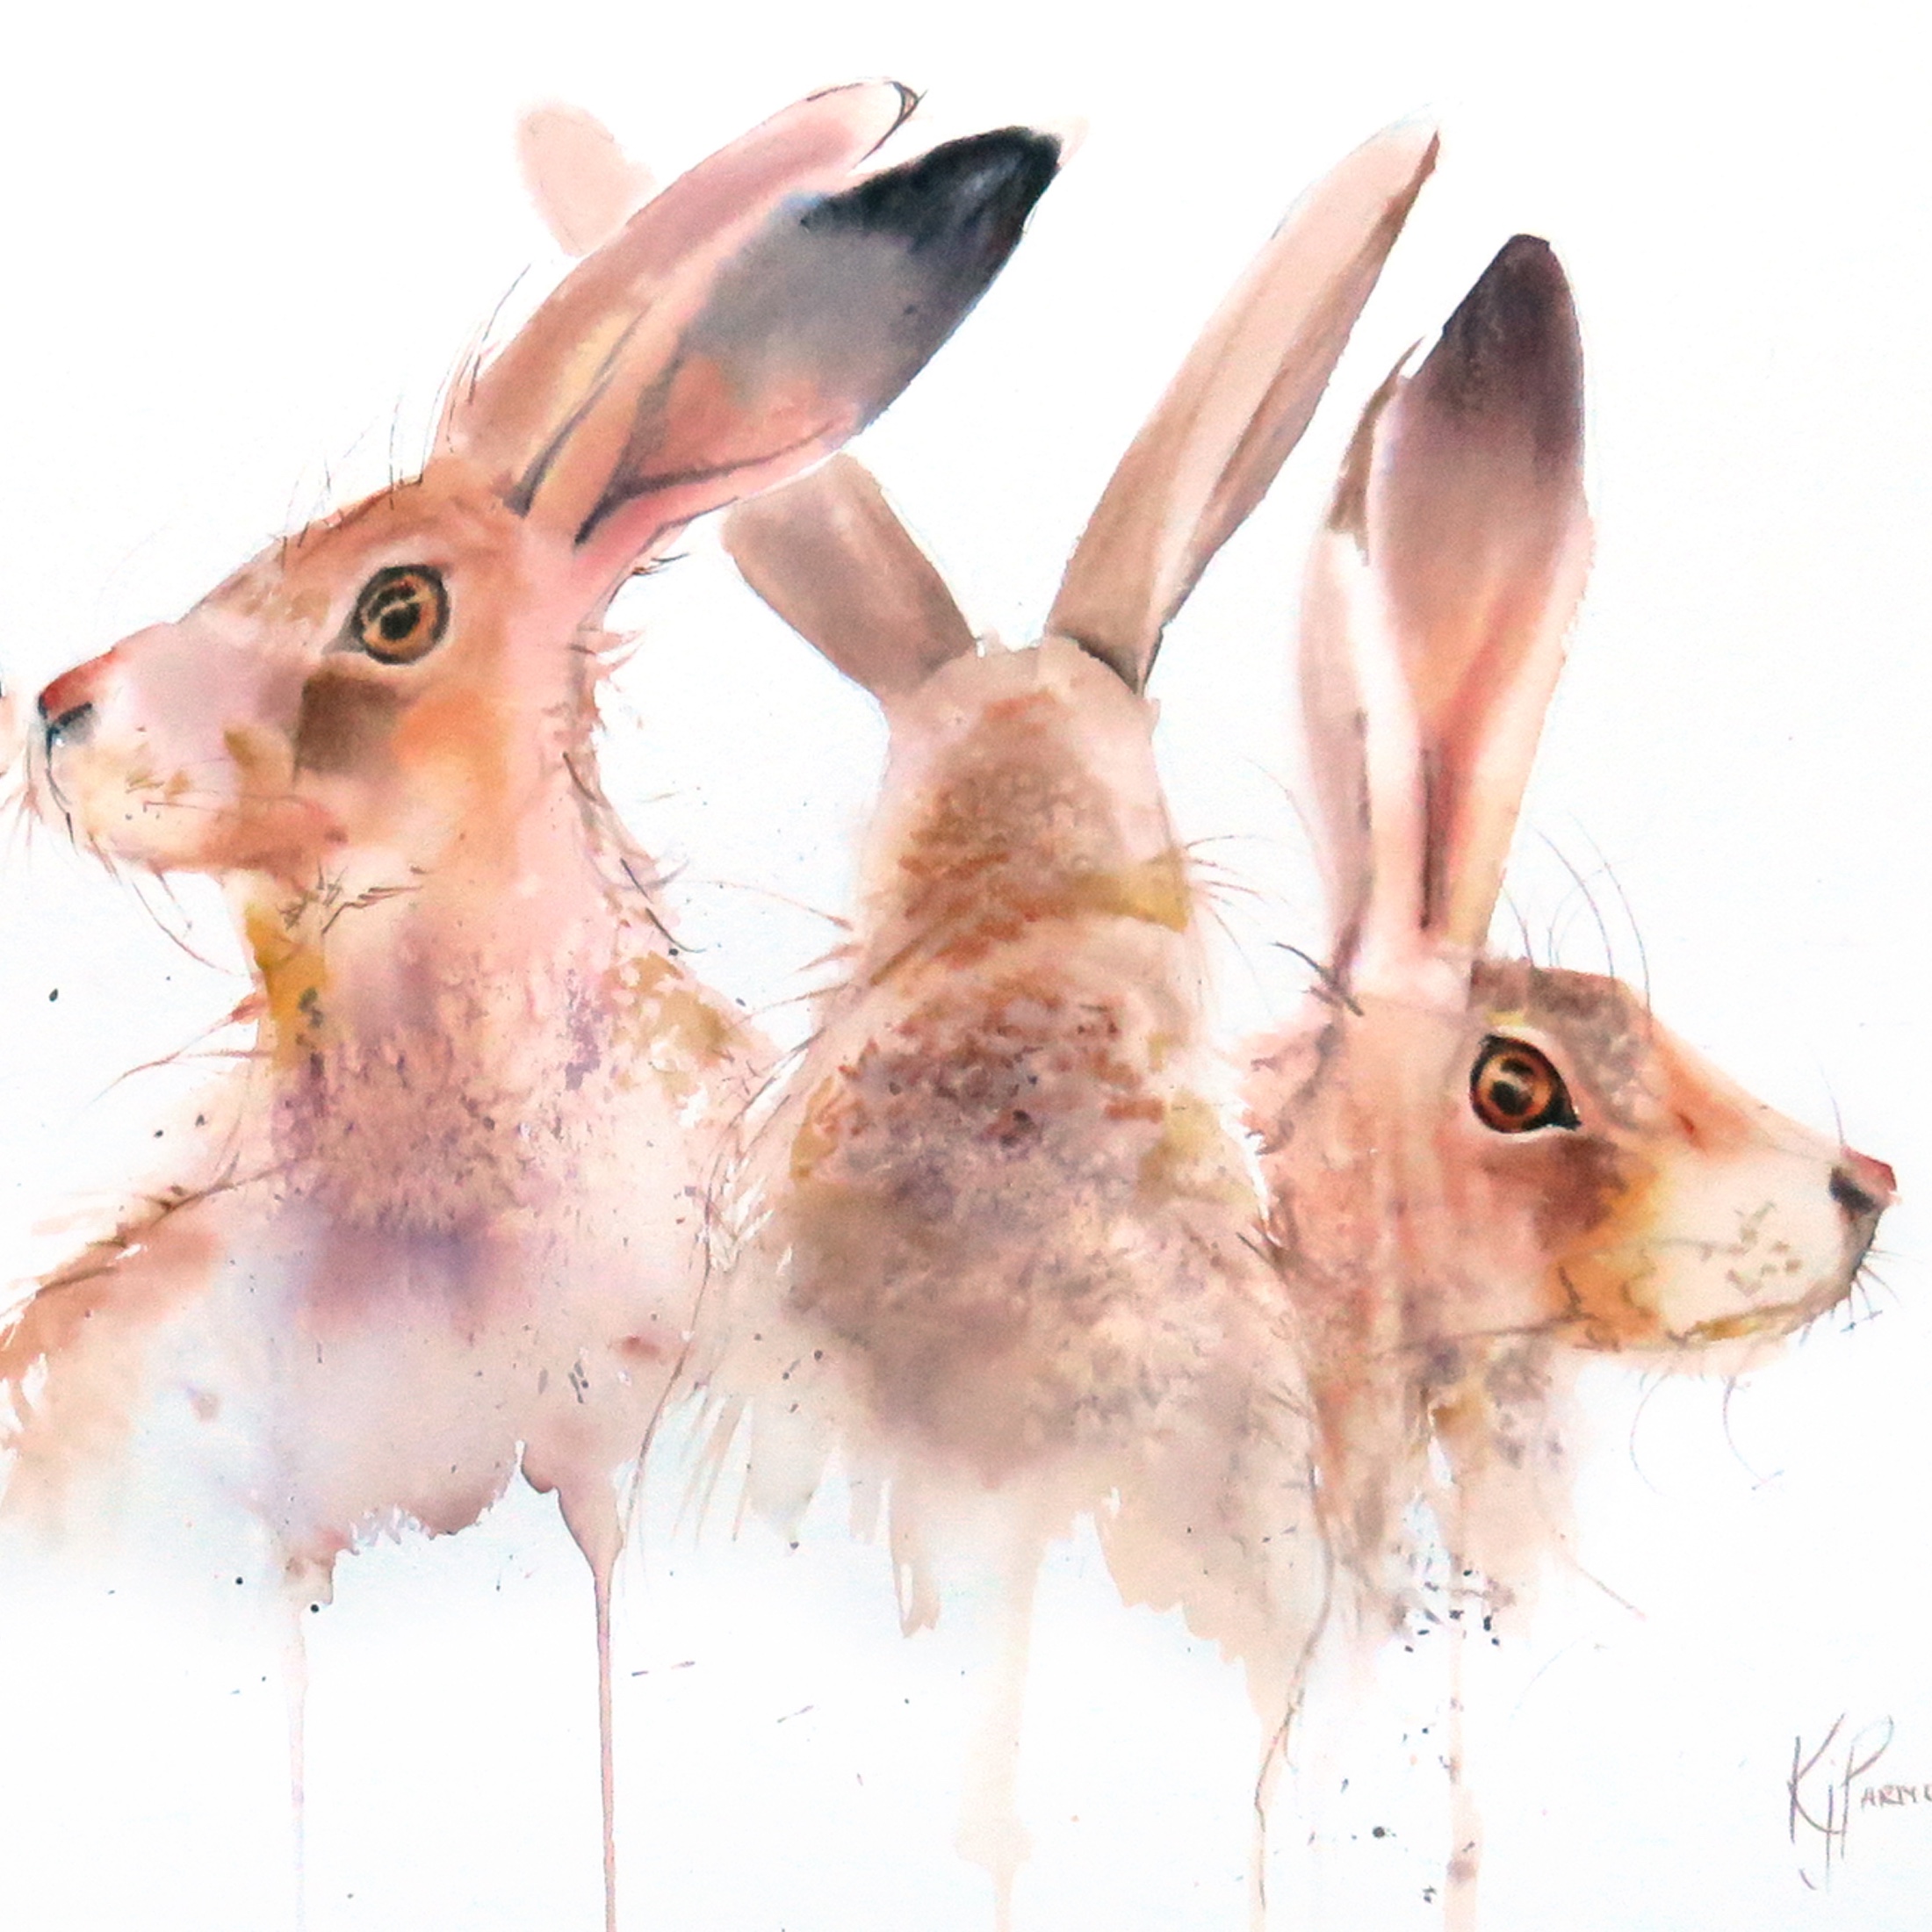 Hare Bunch